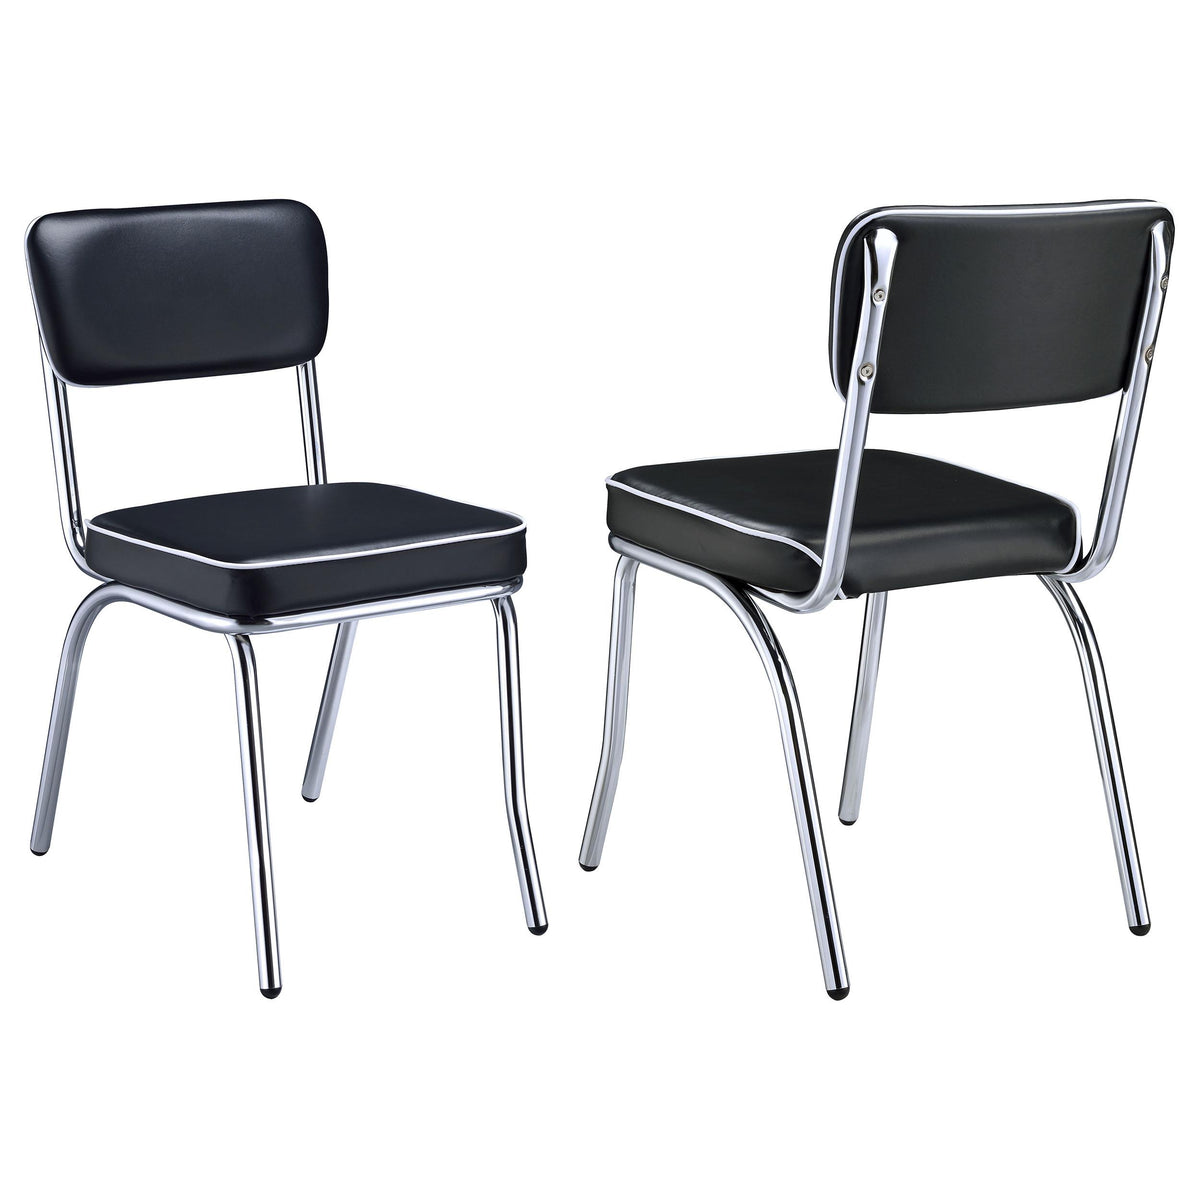 Retro Open Back Side Chairs Black and Chrome (Set of 2)  Las Vegas Furniture Stores